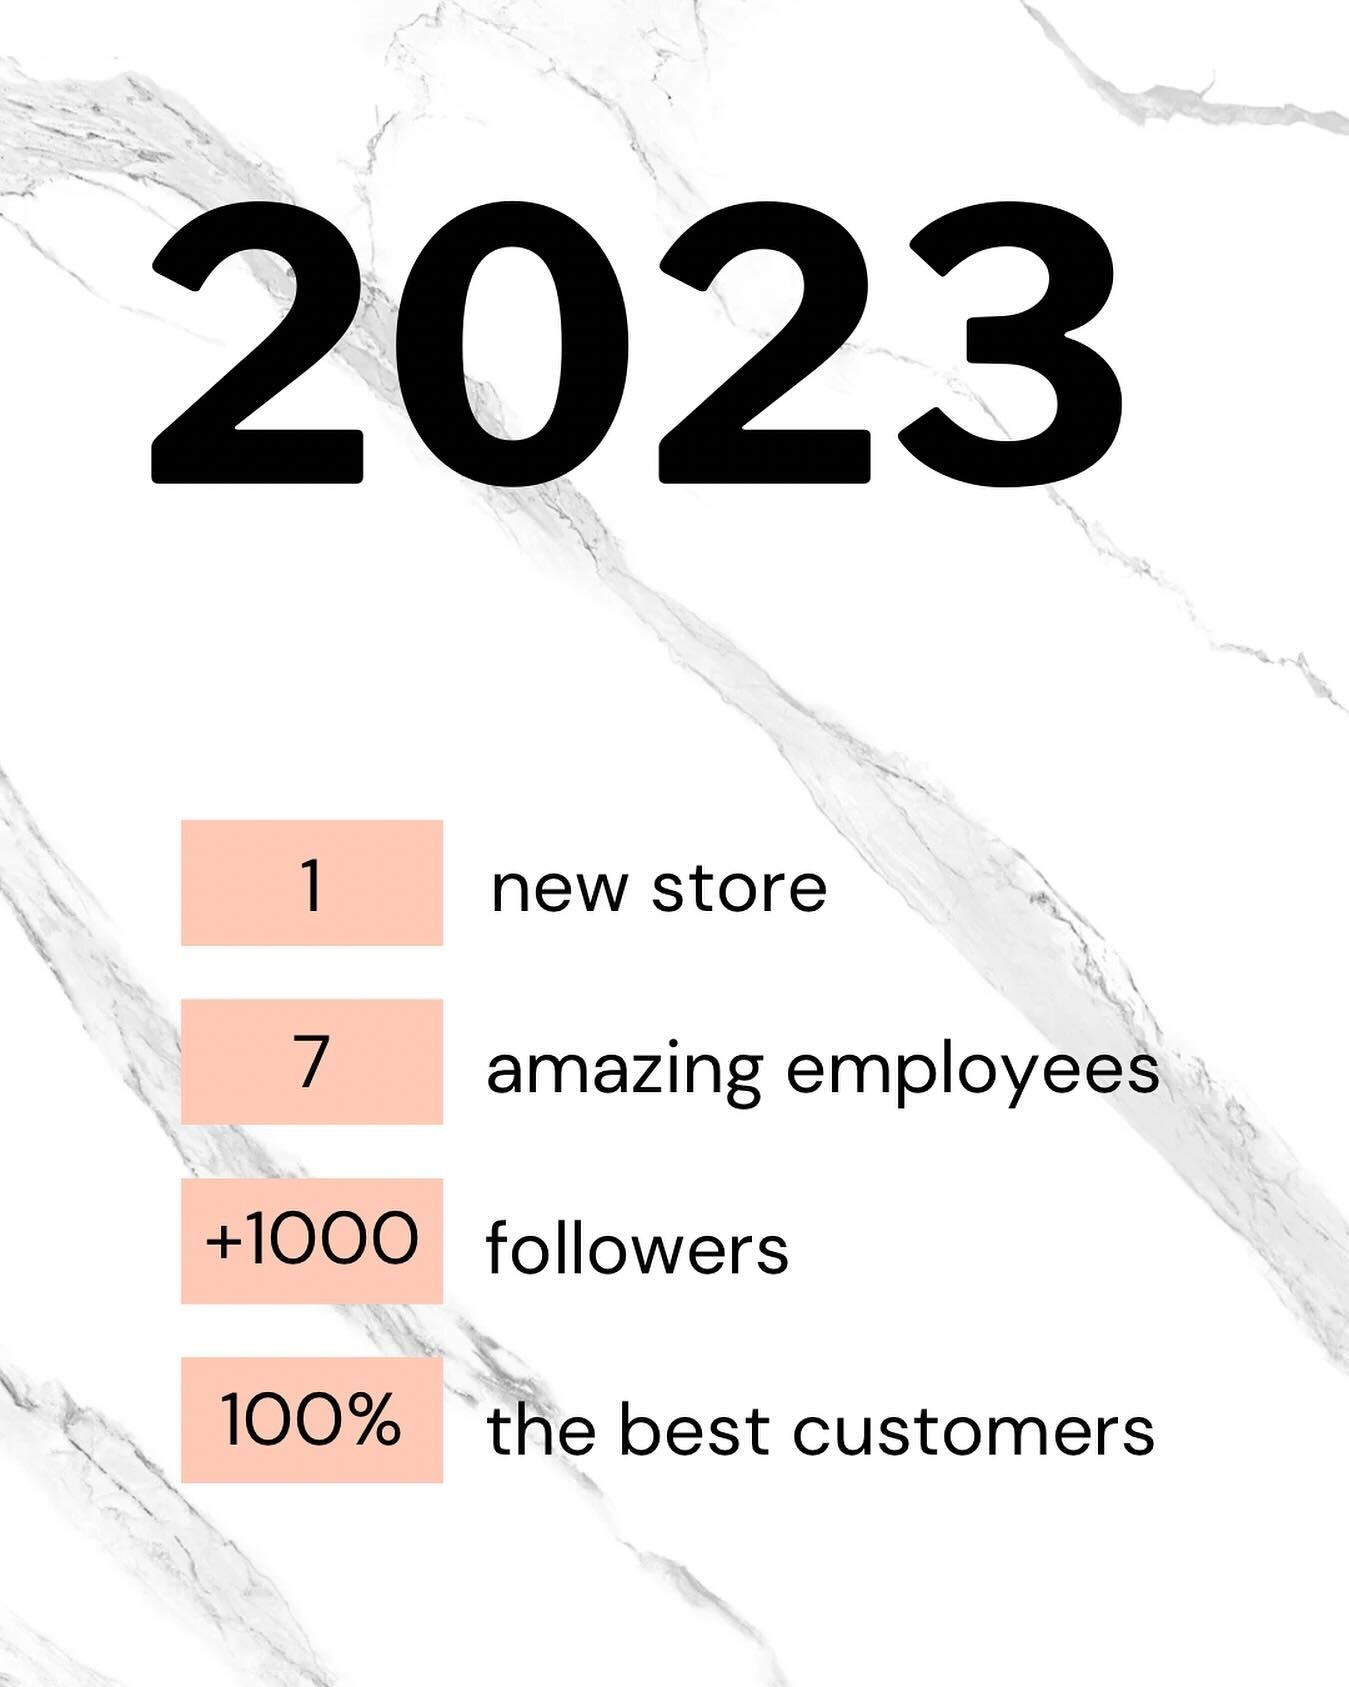 Happy New Year!  2023 was an incredible year filled with many firsts at Lola Mer. And, we are just getting started!  We have so many new items and brands to bring you in 2024. 

THANK YOU to all our employees, customers, supporters, family and friend